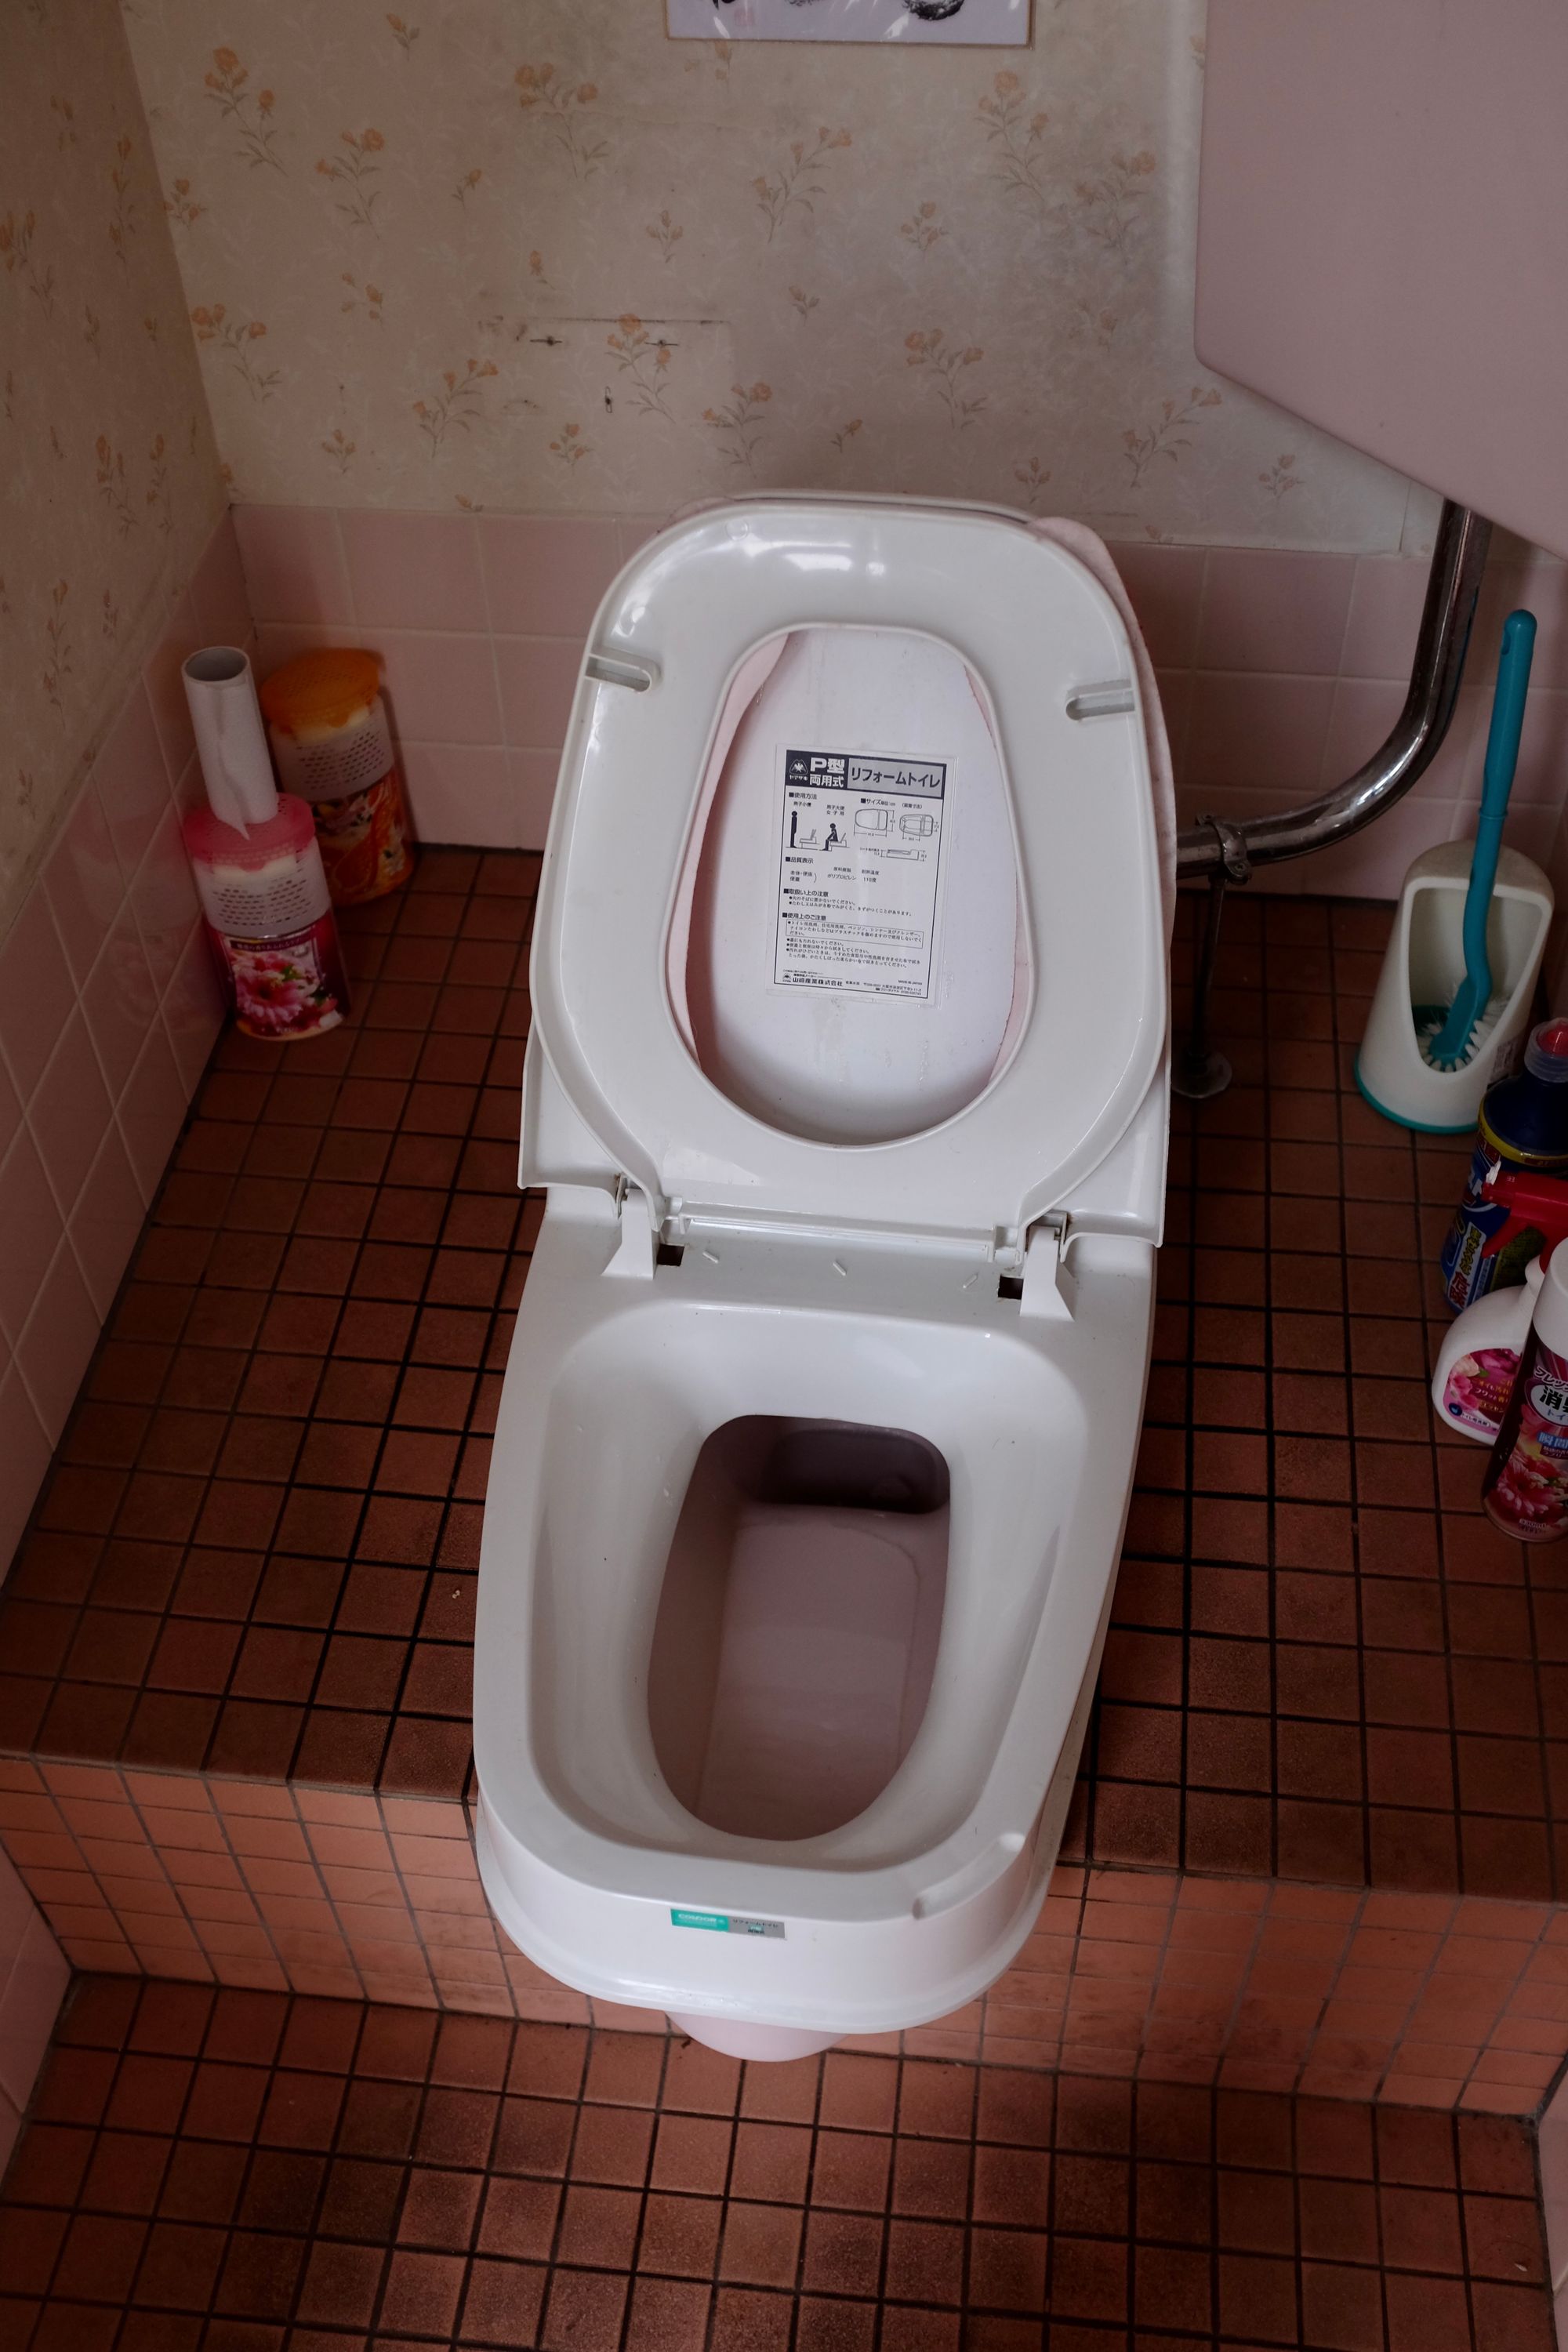 A Western toilet installed on the raised platform of a Japanese-style squat toilet.